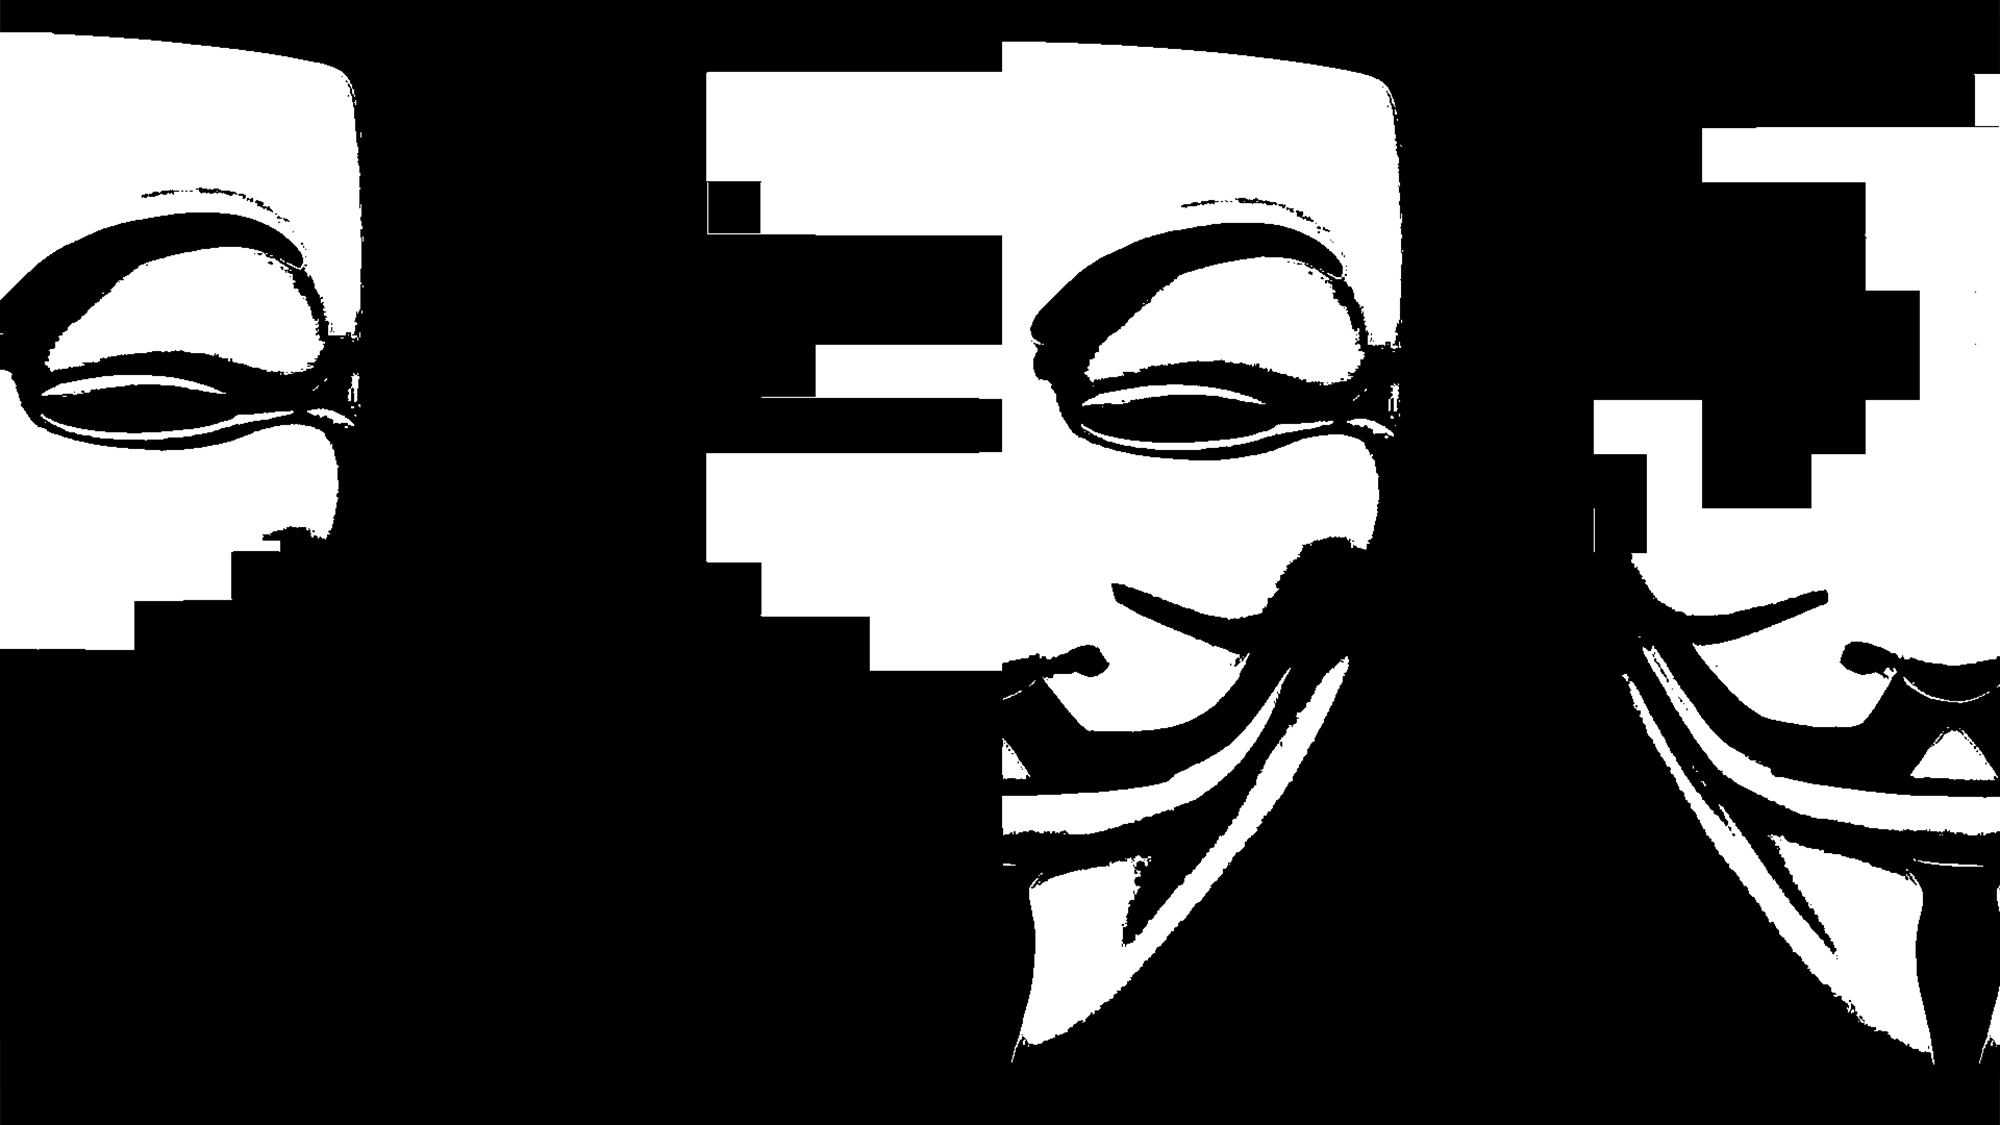 The Hacker Group Anonymous Returns The Atlantic - fake hacker trolling on roblox 2 youtube